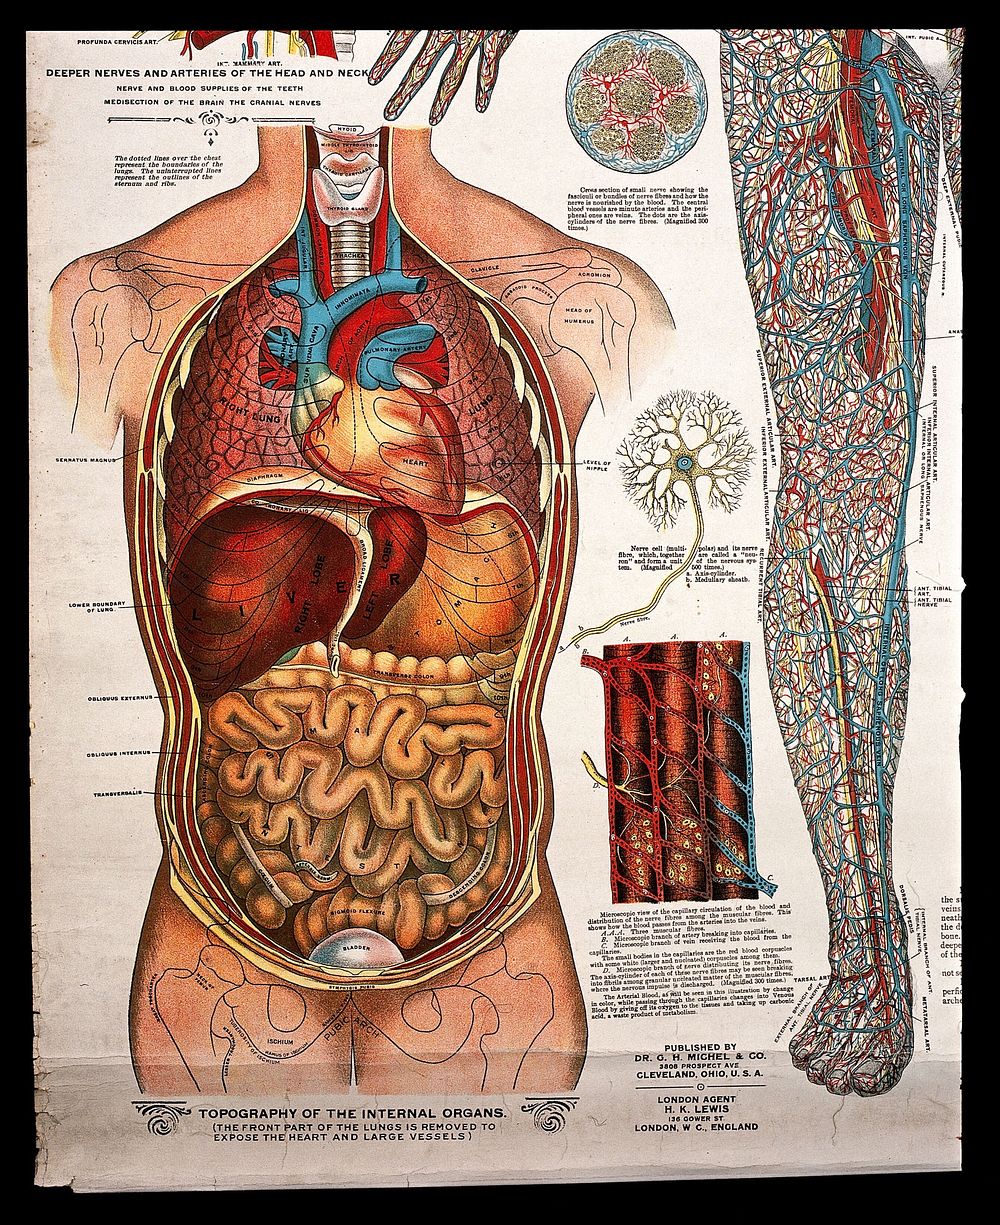 Arterial system of the human body. Chromolithograph by Gustave H. Michel.